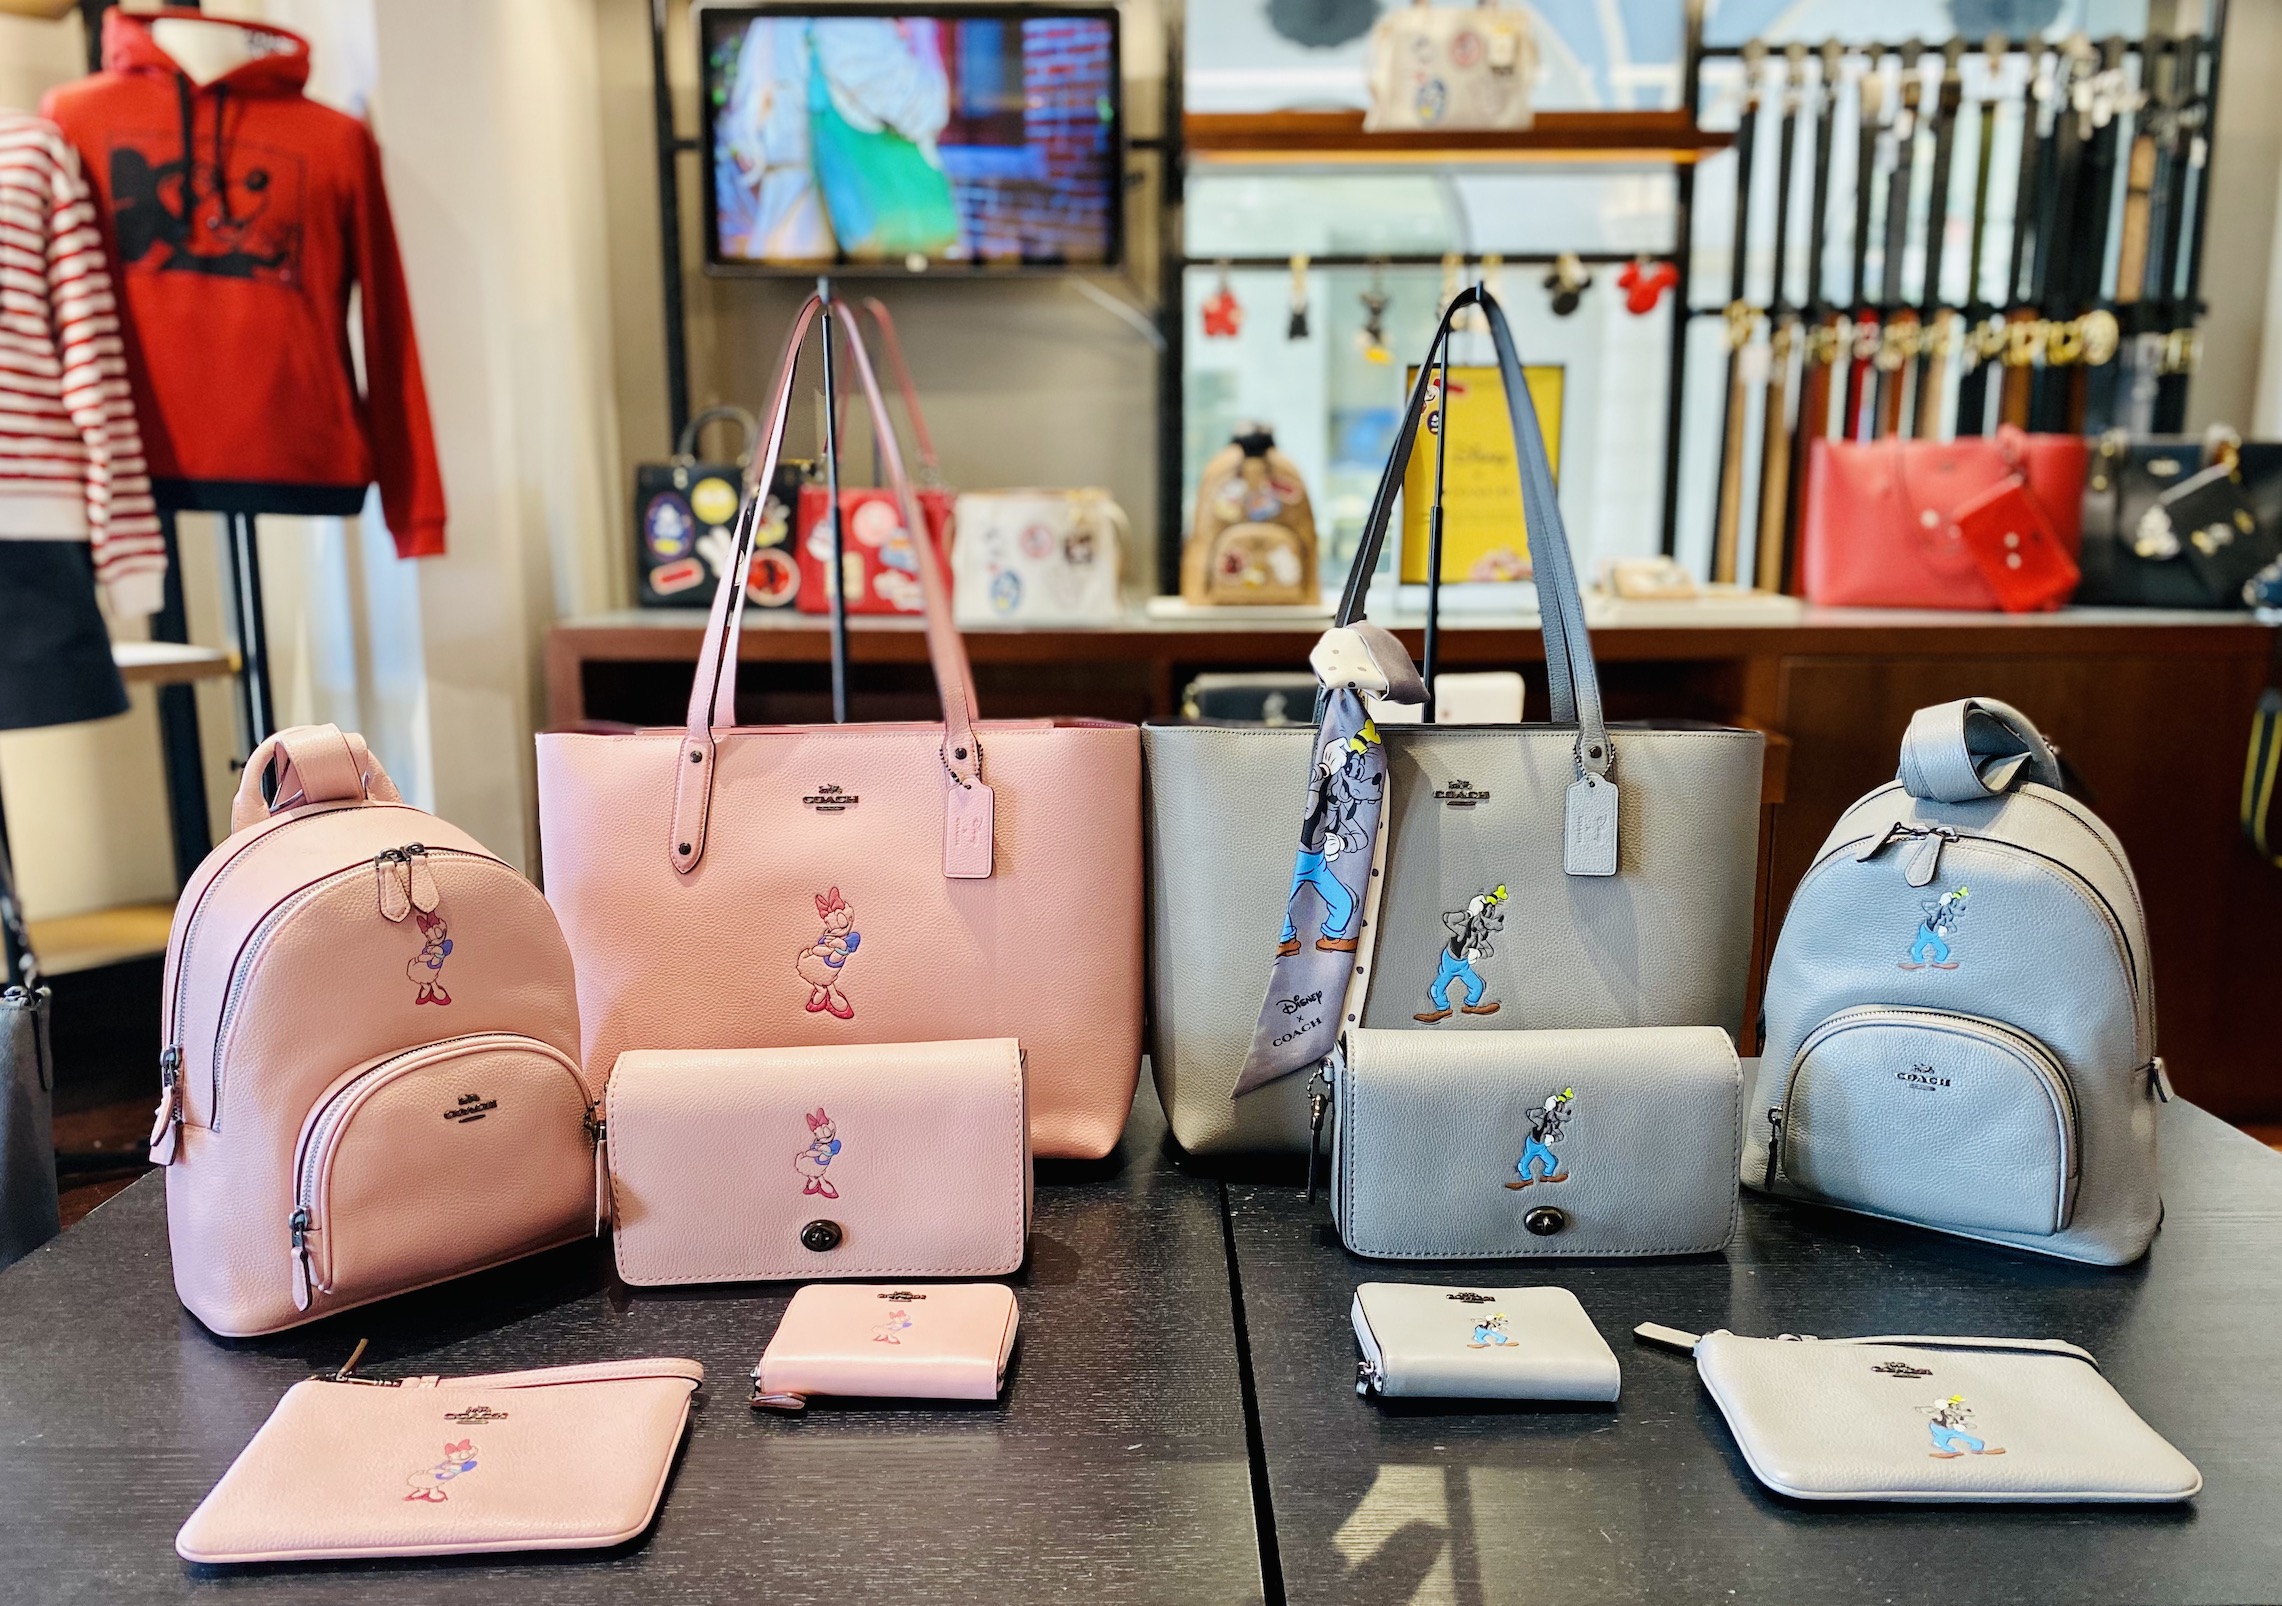 New Disney X Animal Friends Collection Now Available at Coach Outlets